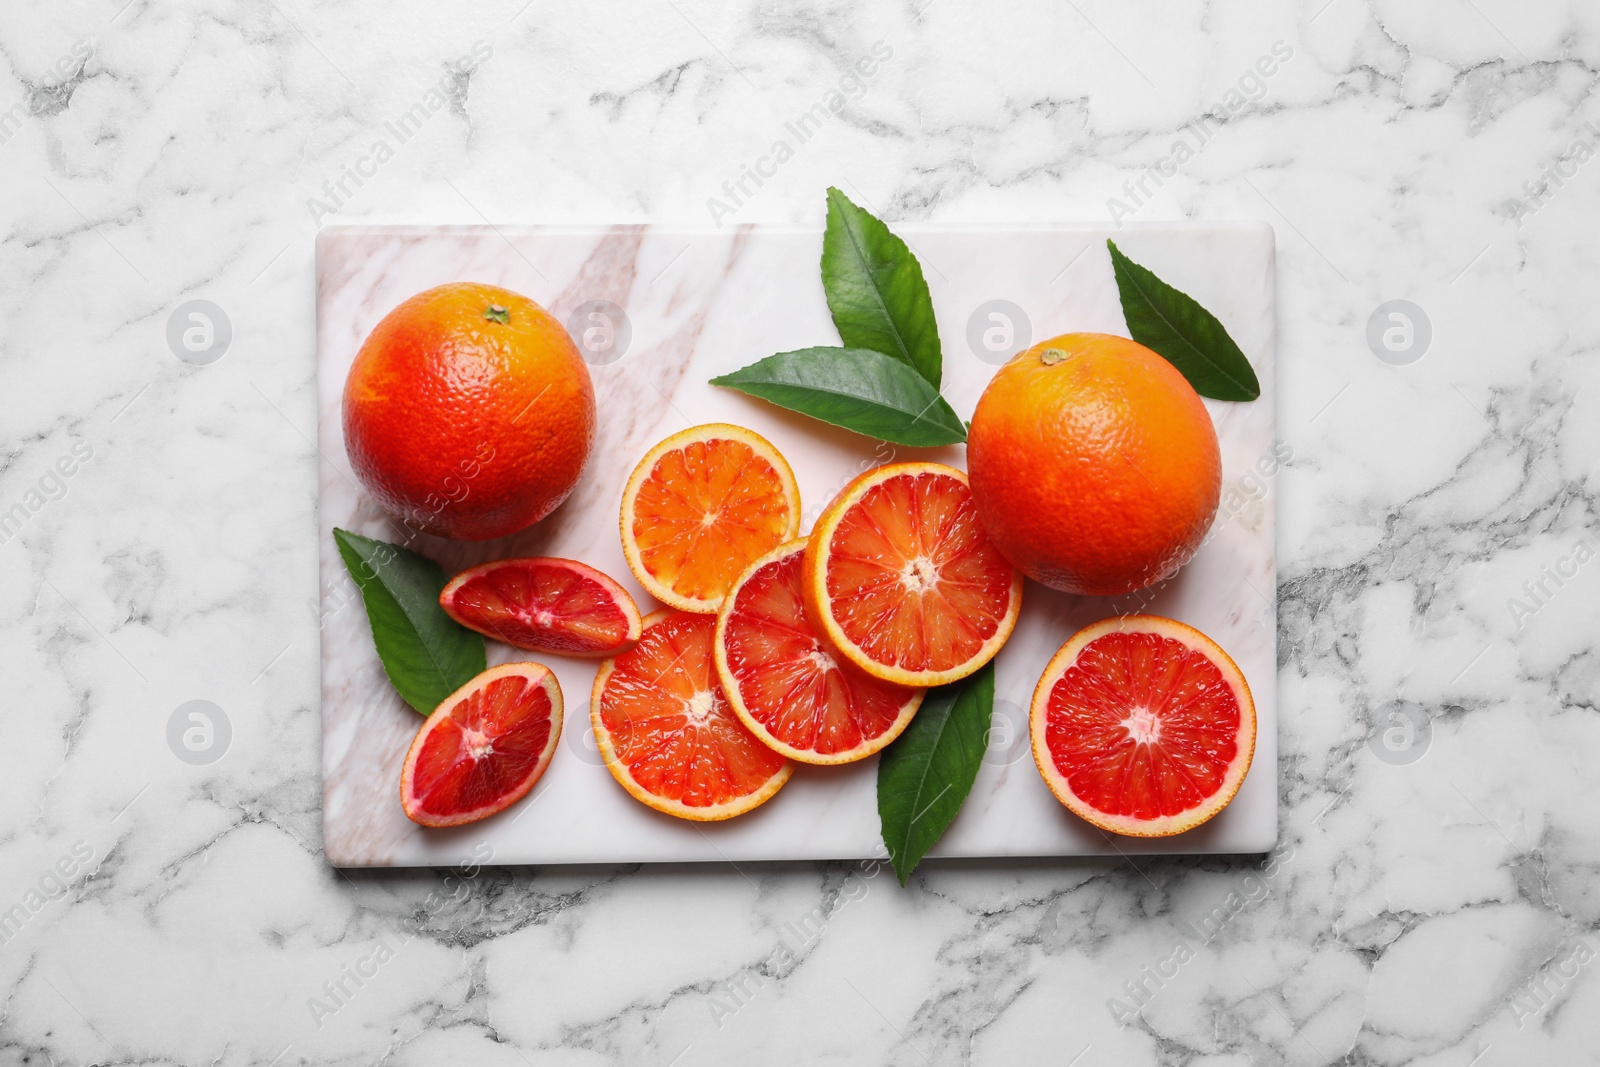 Photo of Whole and cut red oranges with green leaves on white marble table, top view